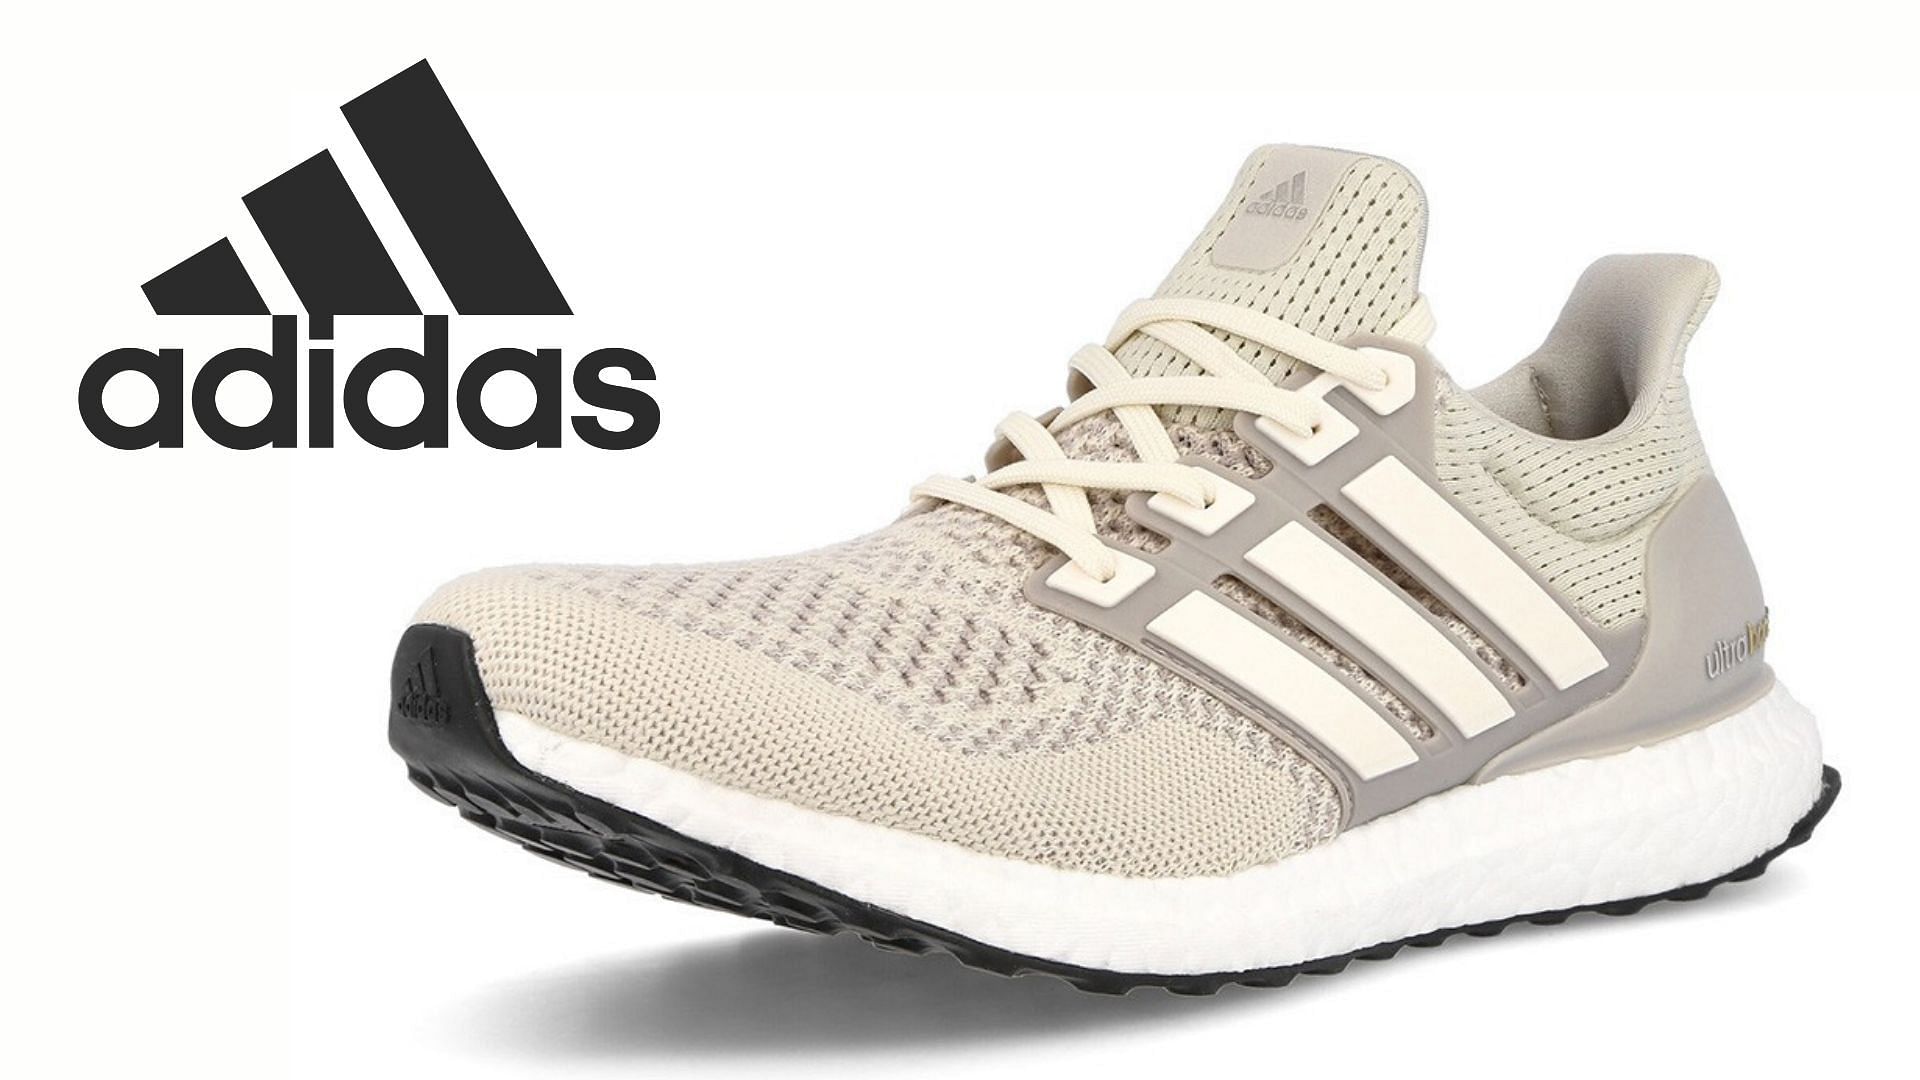 Conquista camisa Retocar Where to buy Adidas UltraBOOST 1.0 Cream shoes ? Release date, price and  more details explored